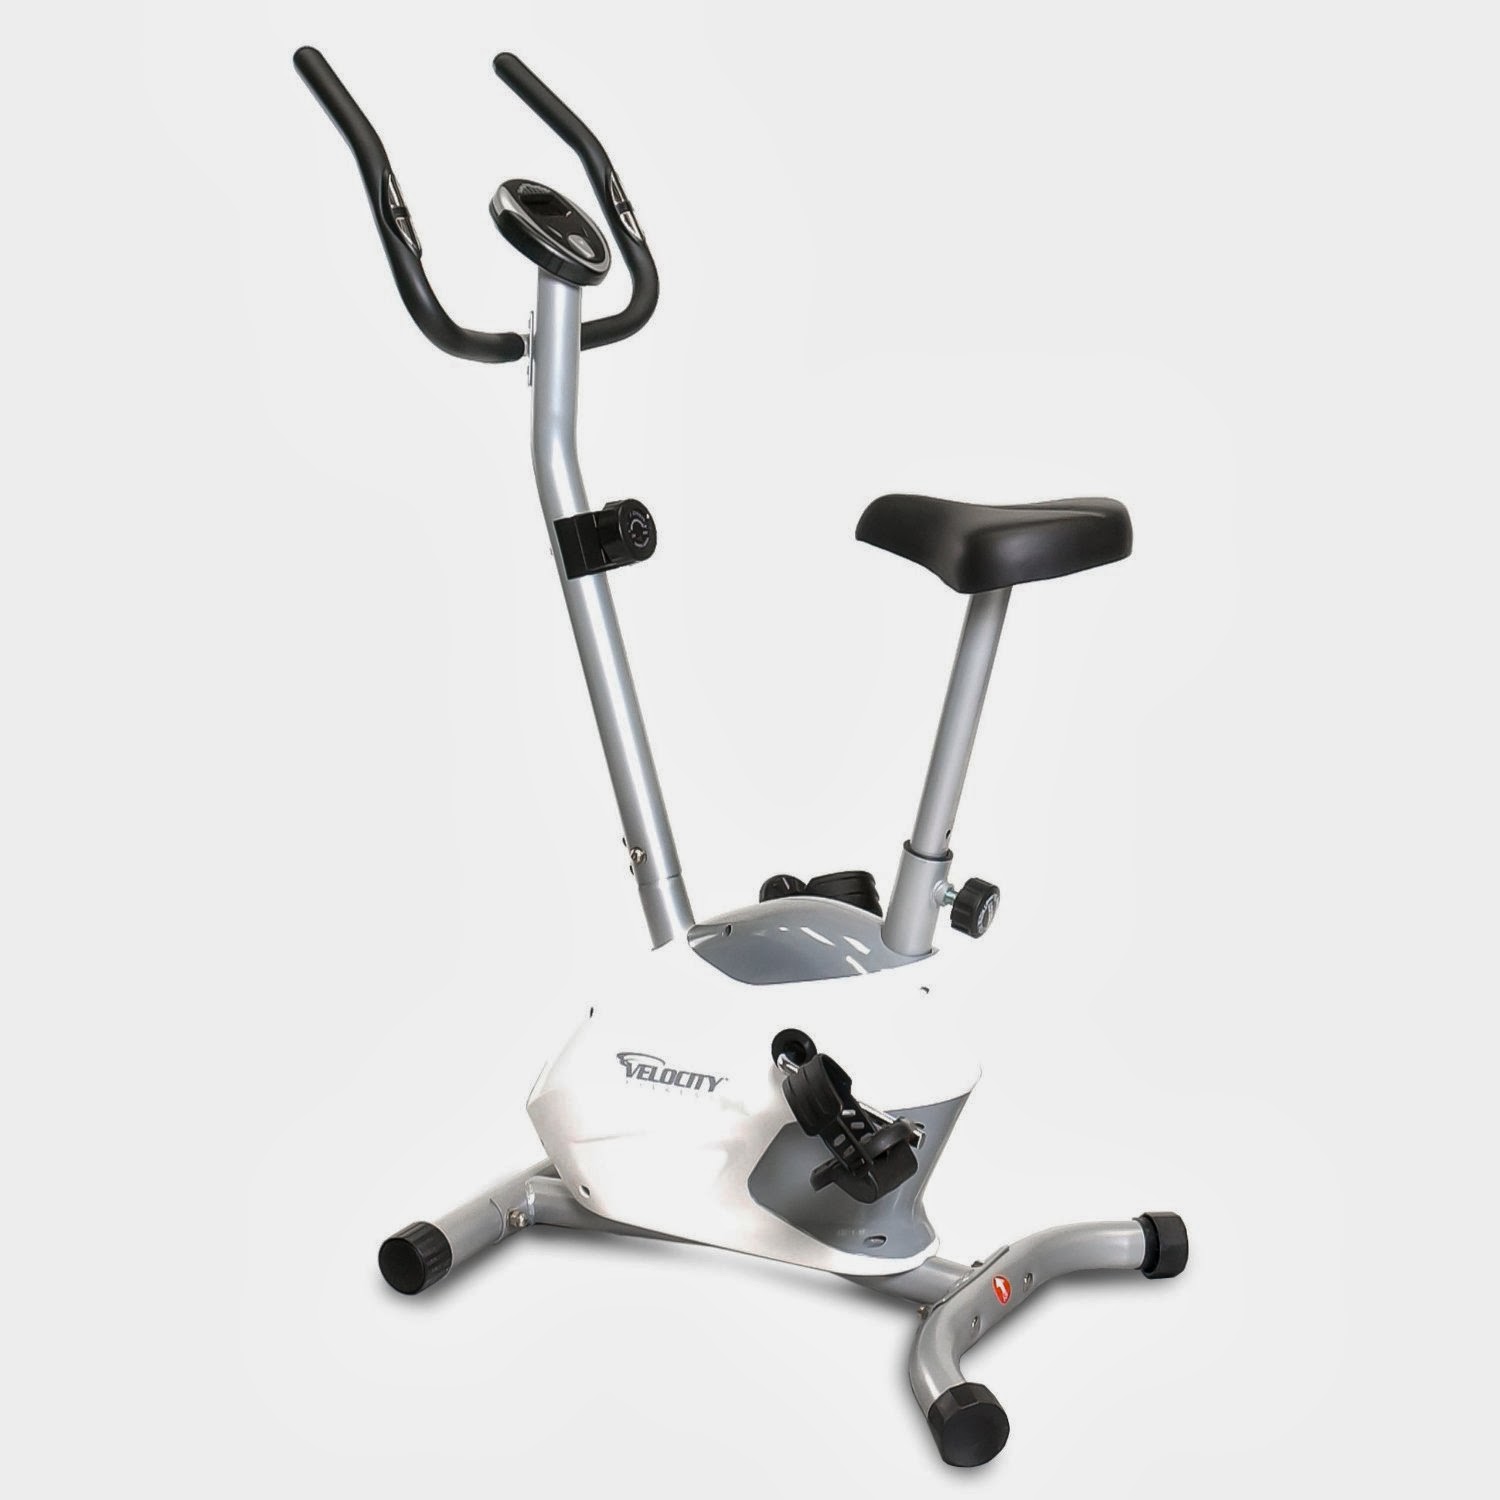 Velocity Exercise CHB-U2101 Upright Exercise Bike, review of features